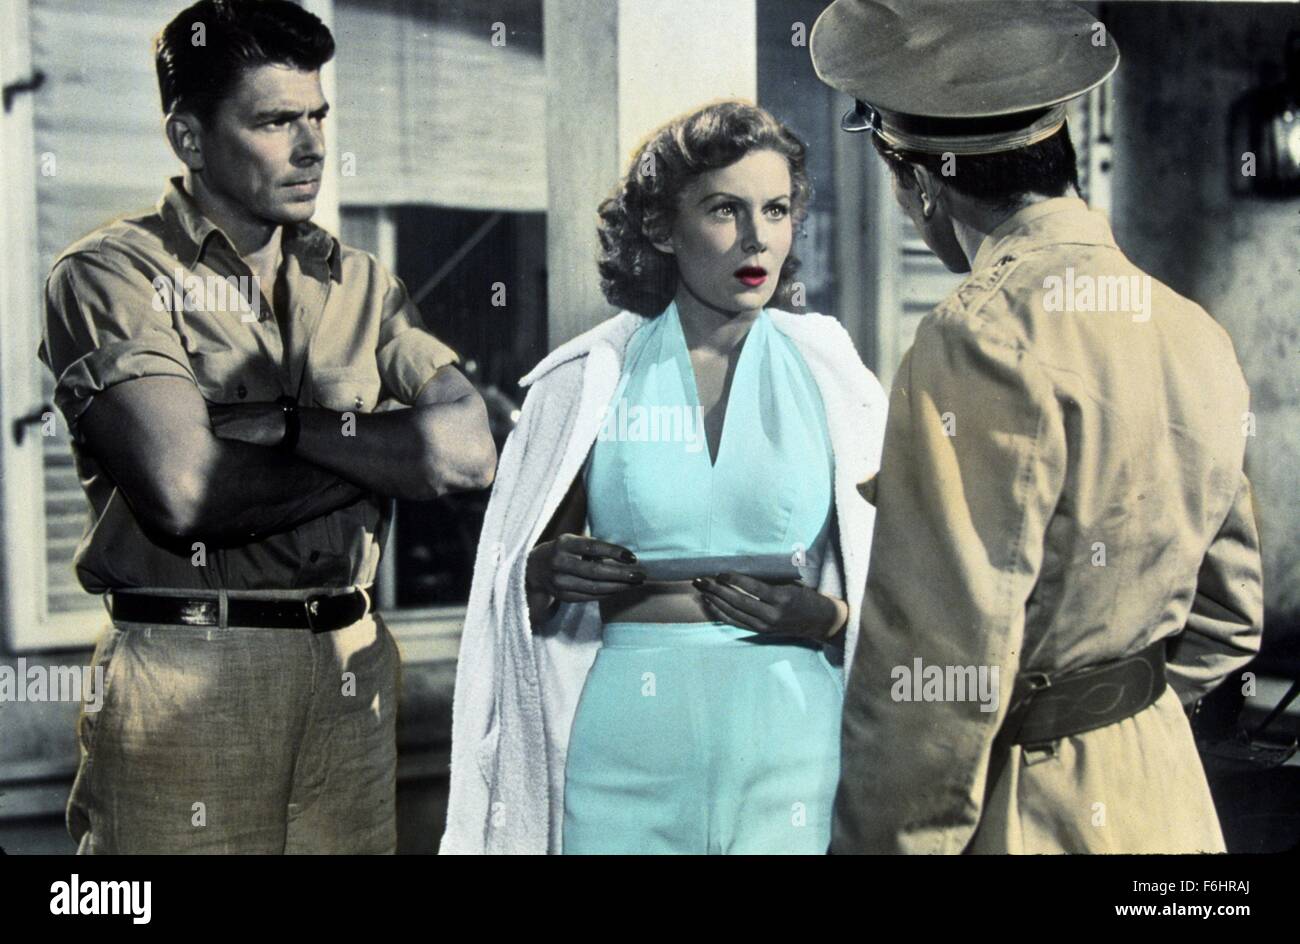 1953, Film Title: TROPIC ZONE, Director: LEWIS FOSTER, Studio: PARAMOUNT, Pictured: 1953, RHONDA FLEMING, LEWIS FOSTER, RONALD REAGAN, INTERROGATING, INTIMIDATING, OFFENDING, HUMILIATING, BELITTLING, MIDRIFF, MILITARY UNIFORM, POWER DRUNK, EGOTISTICAL, ARROGANT, SHOCKED, OFFENDED, EMBARRASED, ARMS FOLDED, STERN, SERIOUS. (Credit Image: SNAP) Stock Photo